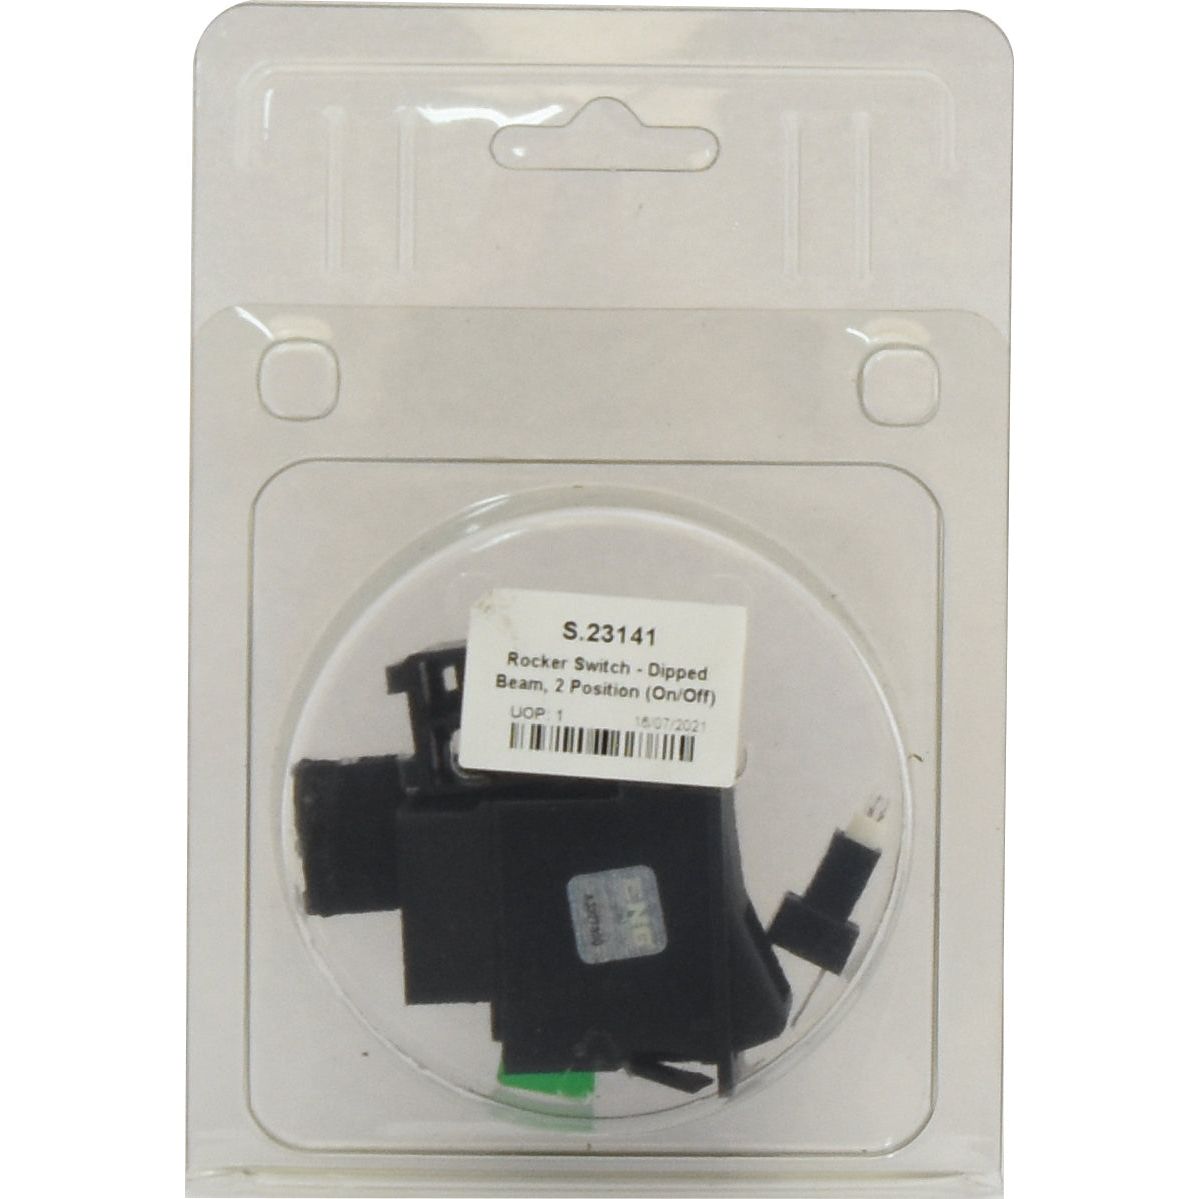 Rocker Switch - Dipped Beam, 2 Position (On/Off)
 - S.23141 - Farming Parts